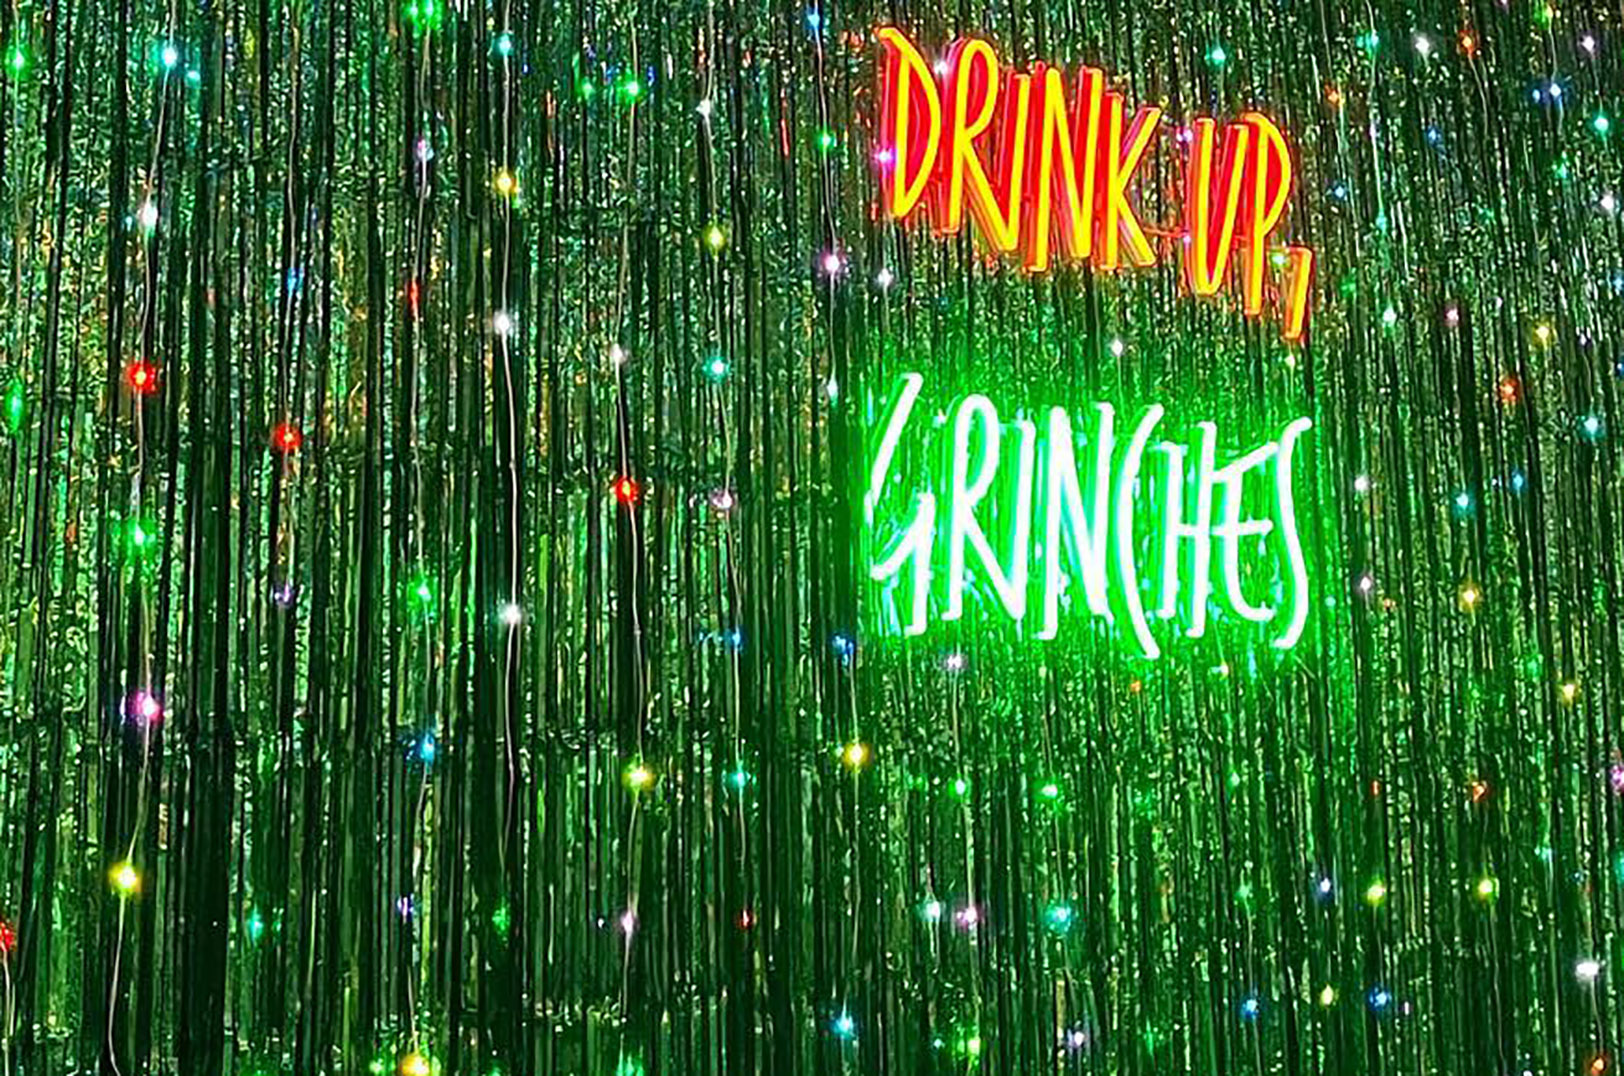 Ho-ho-holiday bars: These Christmas-themed pop-ups will be your next seasonal spot for selfies, spirits